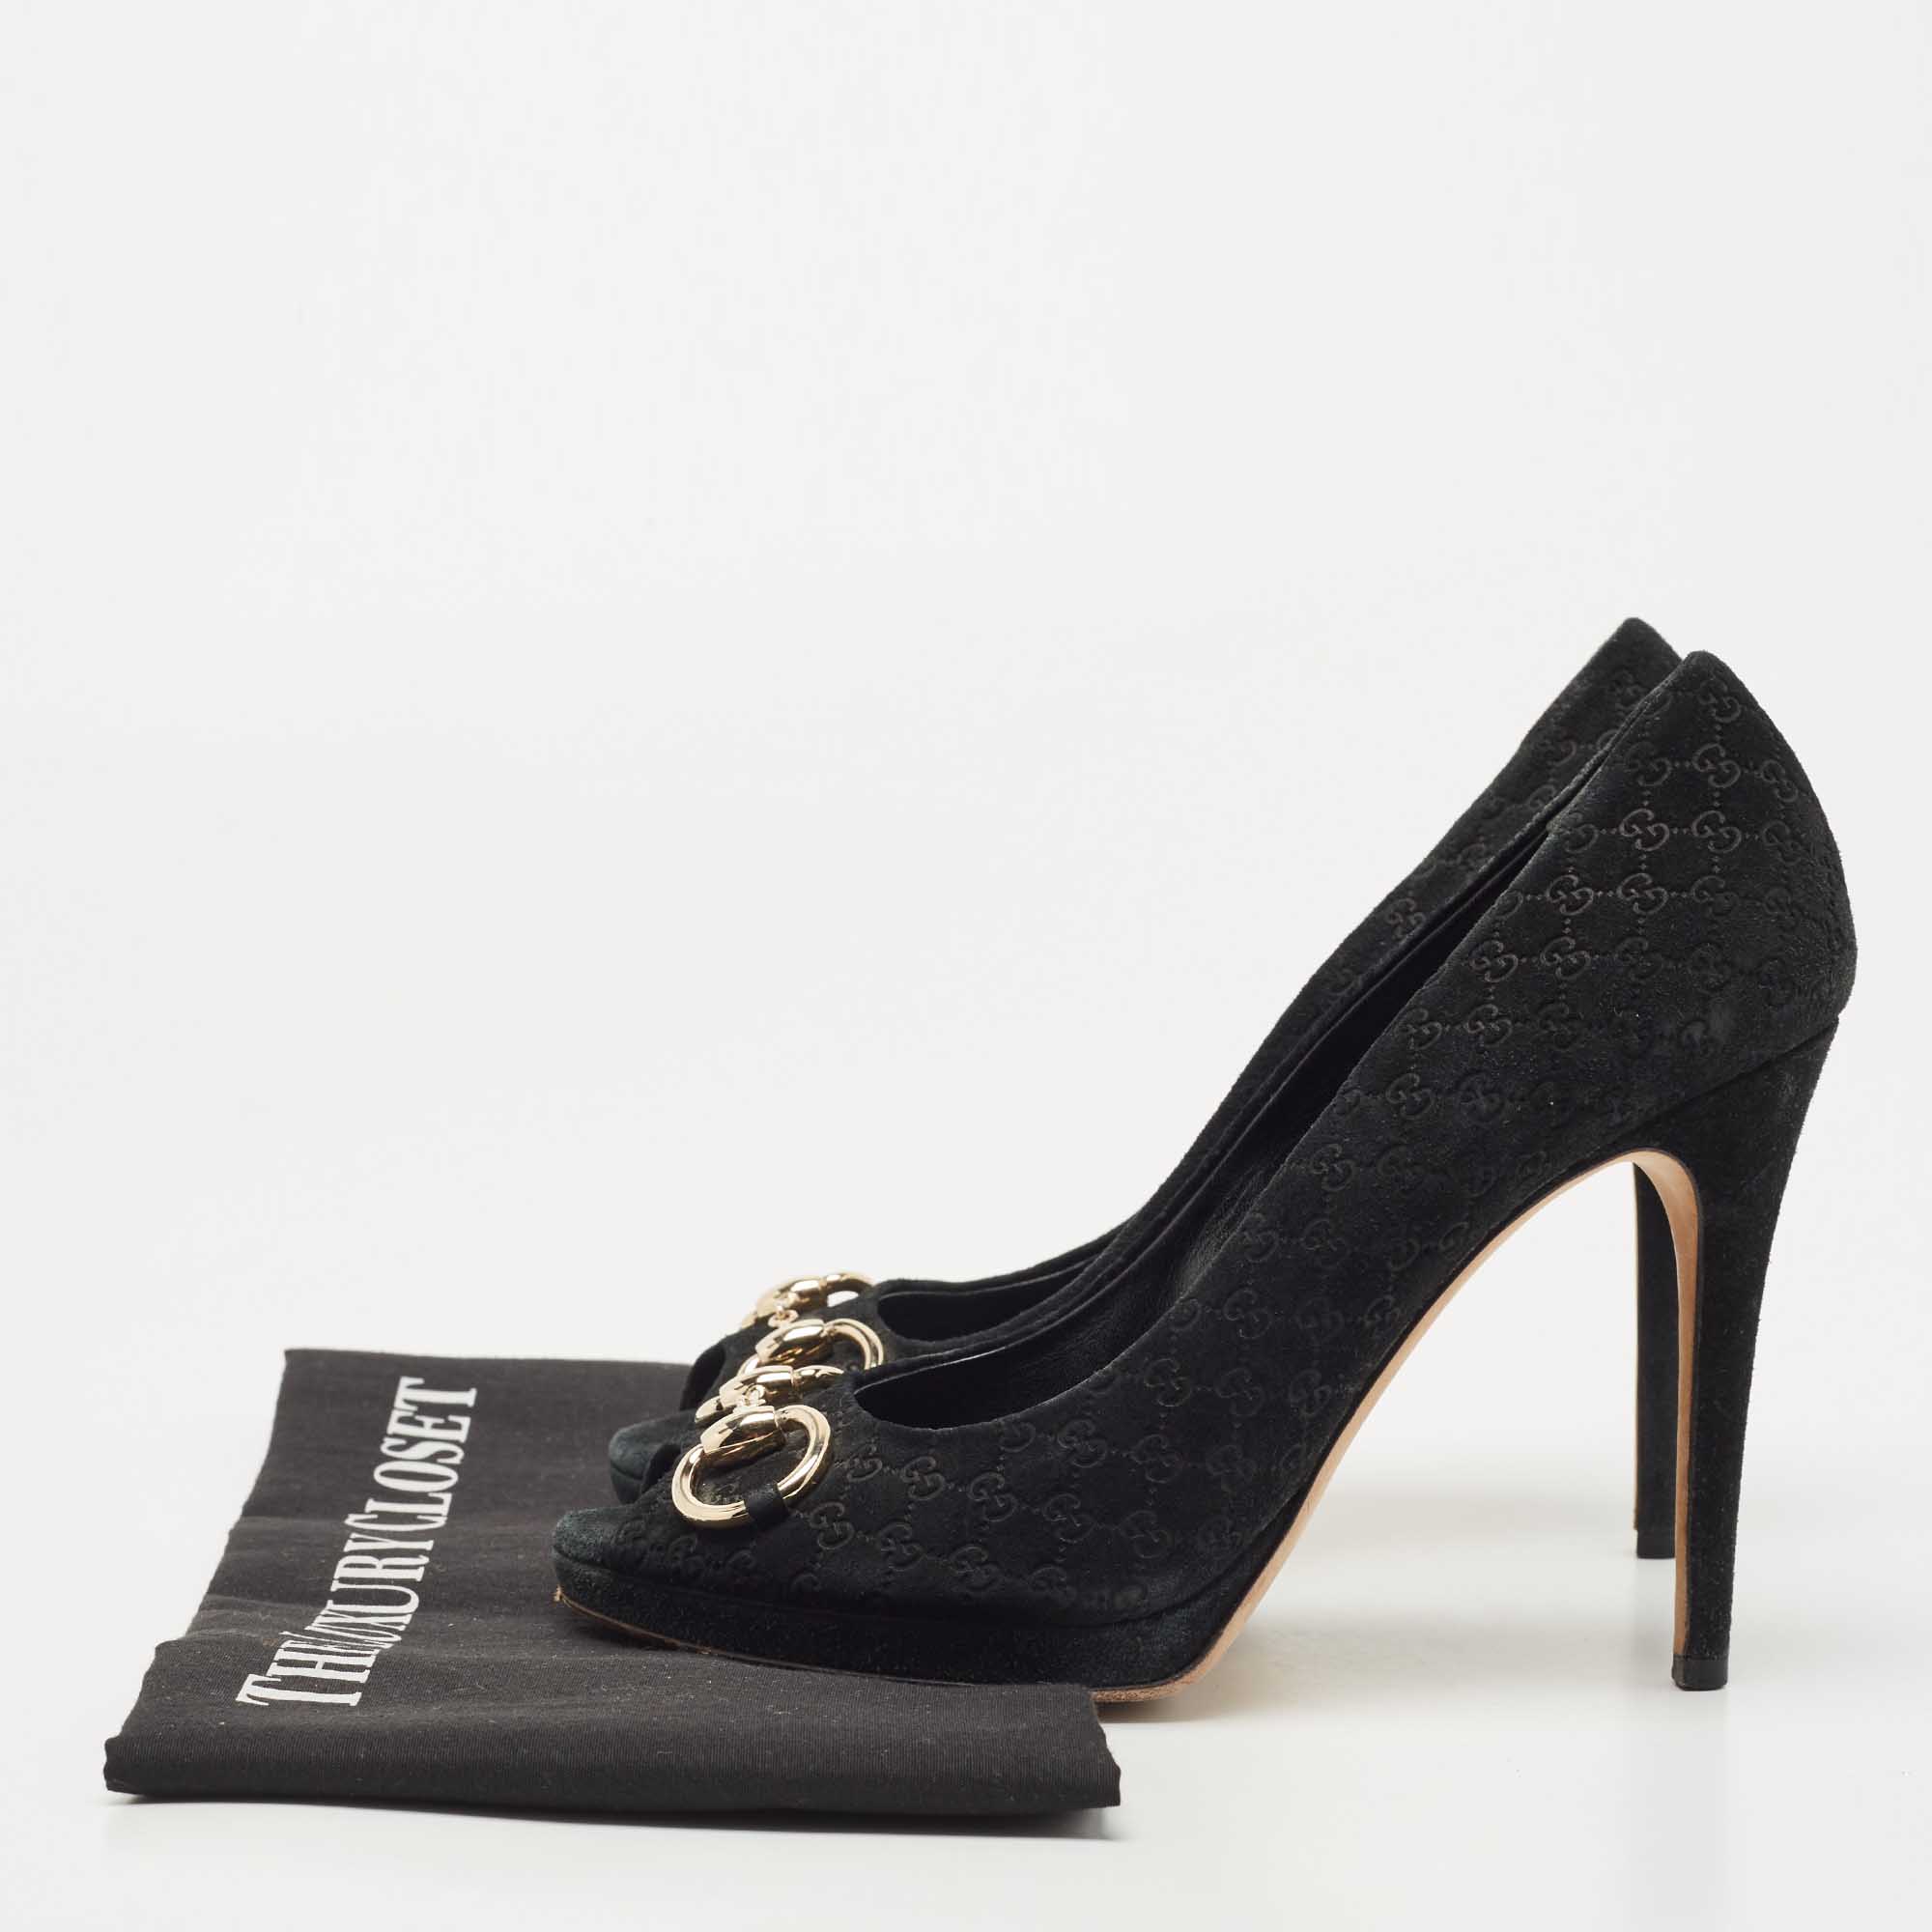 Gucci Black Suede  Hollywood Peep Toe Pumps Size 38